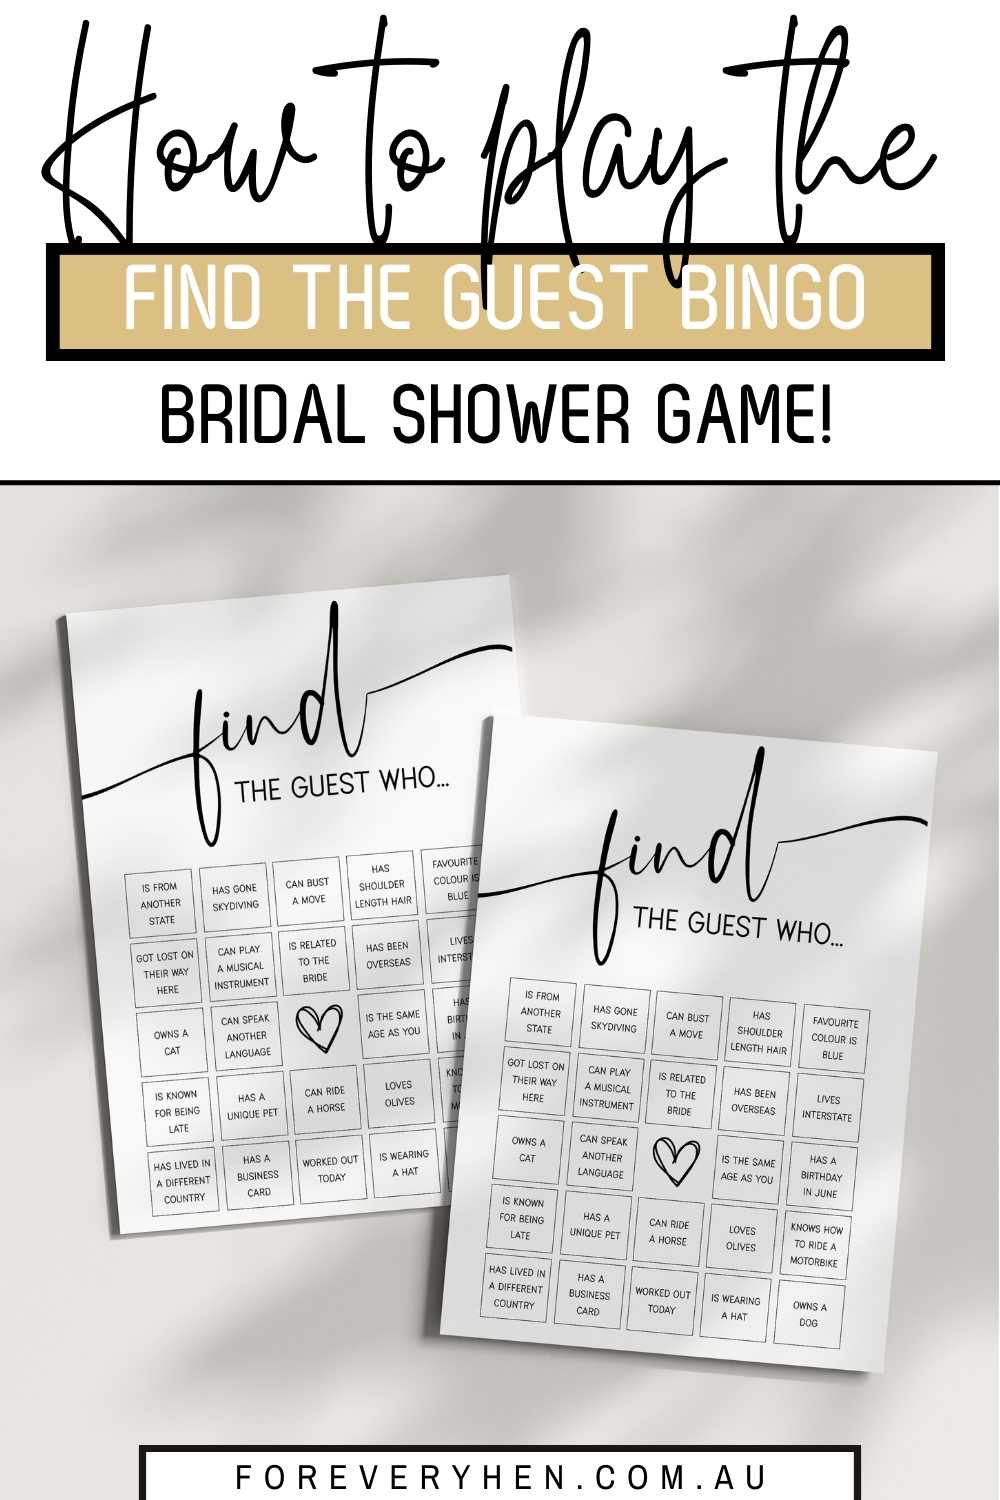 Two minimalist find the guest bingo printables. Text overlay: How to play the find the guest bingo bridal shower game!